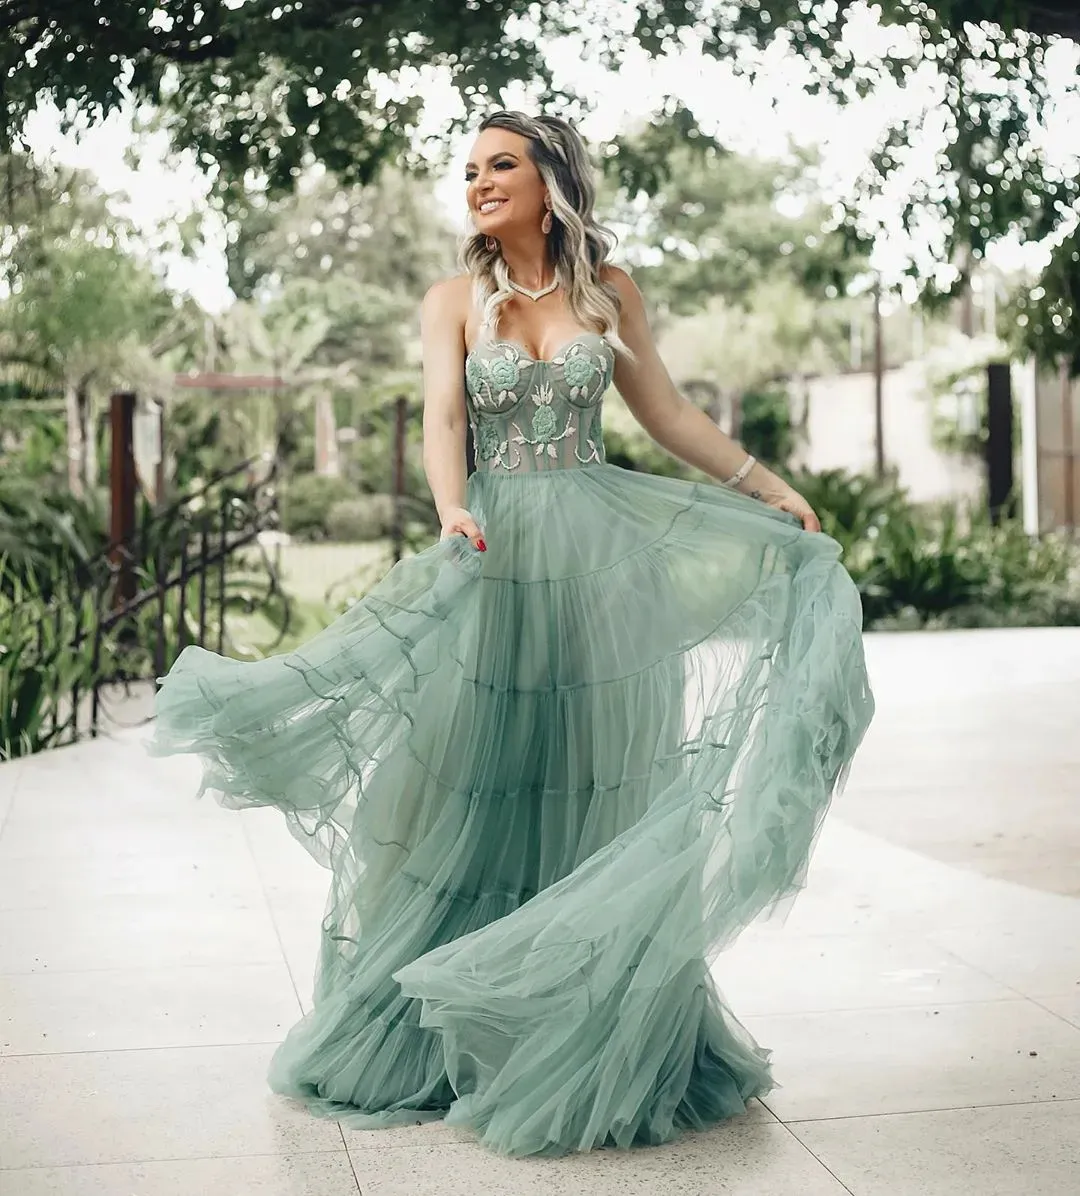 Fabulous Sage Floral Appliqued Prom Dresses Sweetheart Neck Sleeveless Pleated Evening Gowns A Line Floor Length Tulle Formal Dress